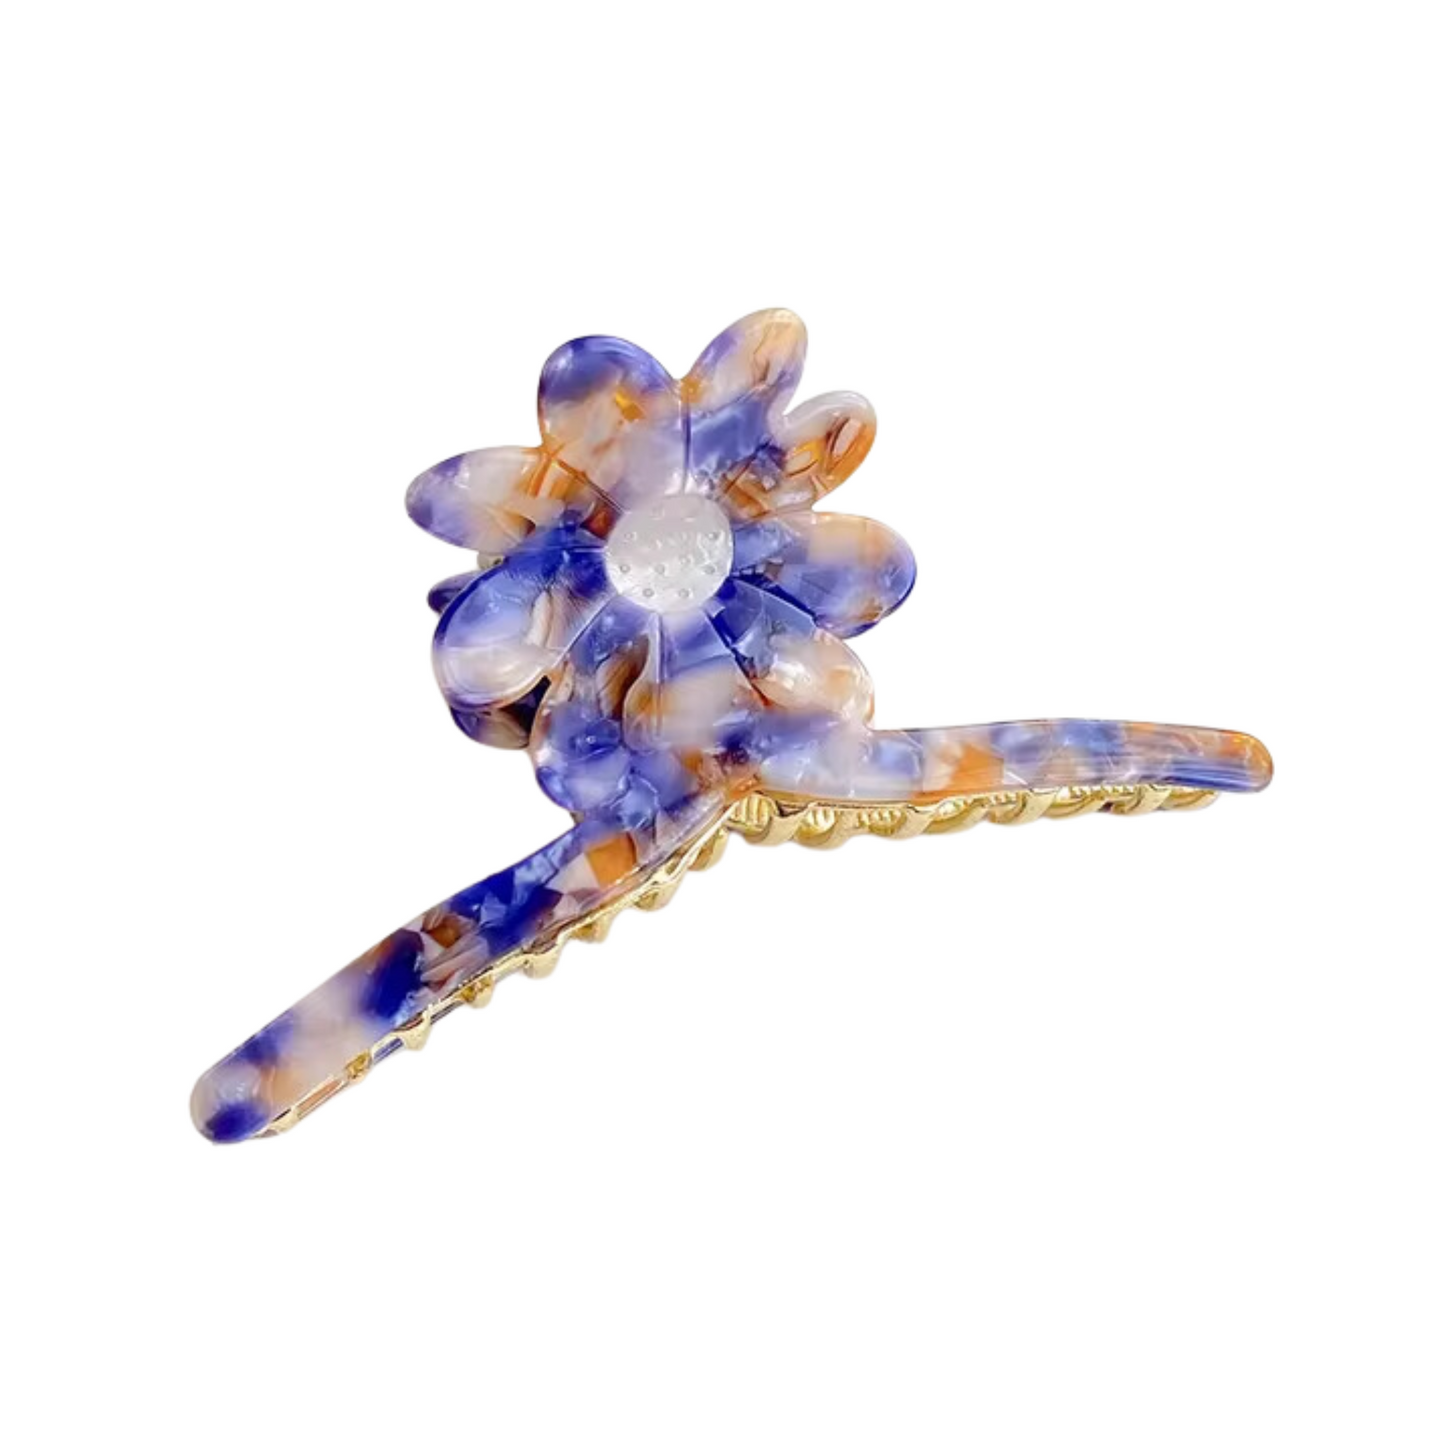 Abigail Cellulose Acetate Hair Claw Clips